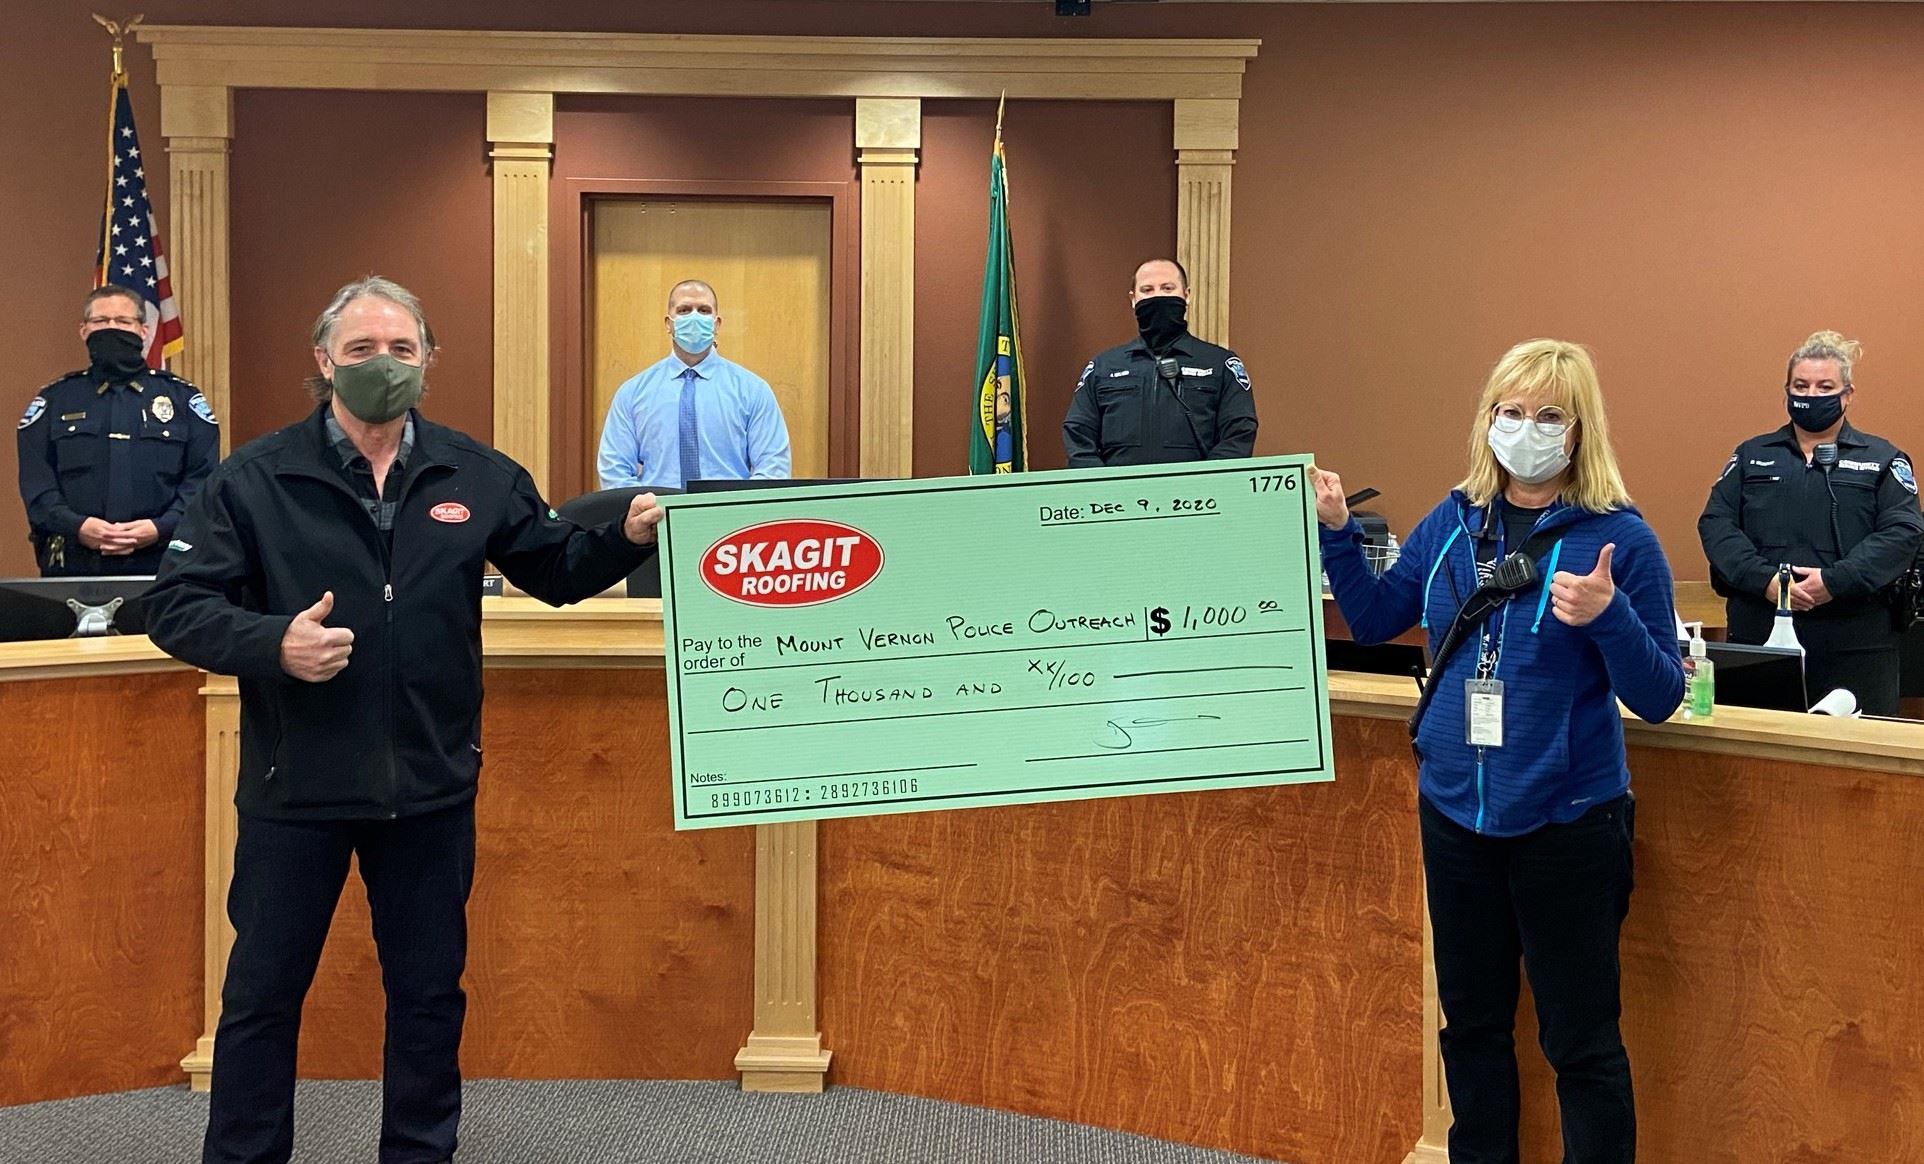 Skagit Roofing Donation To MVPD-Homeless Project